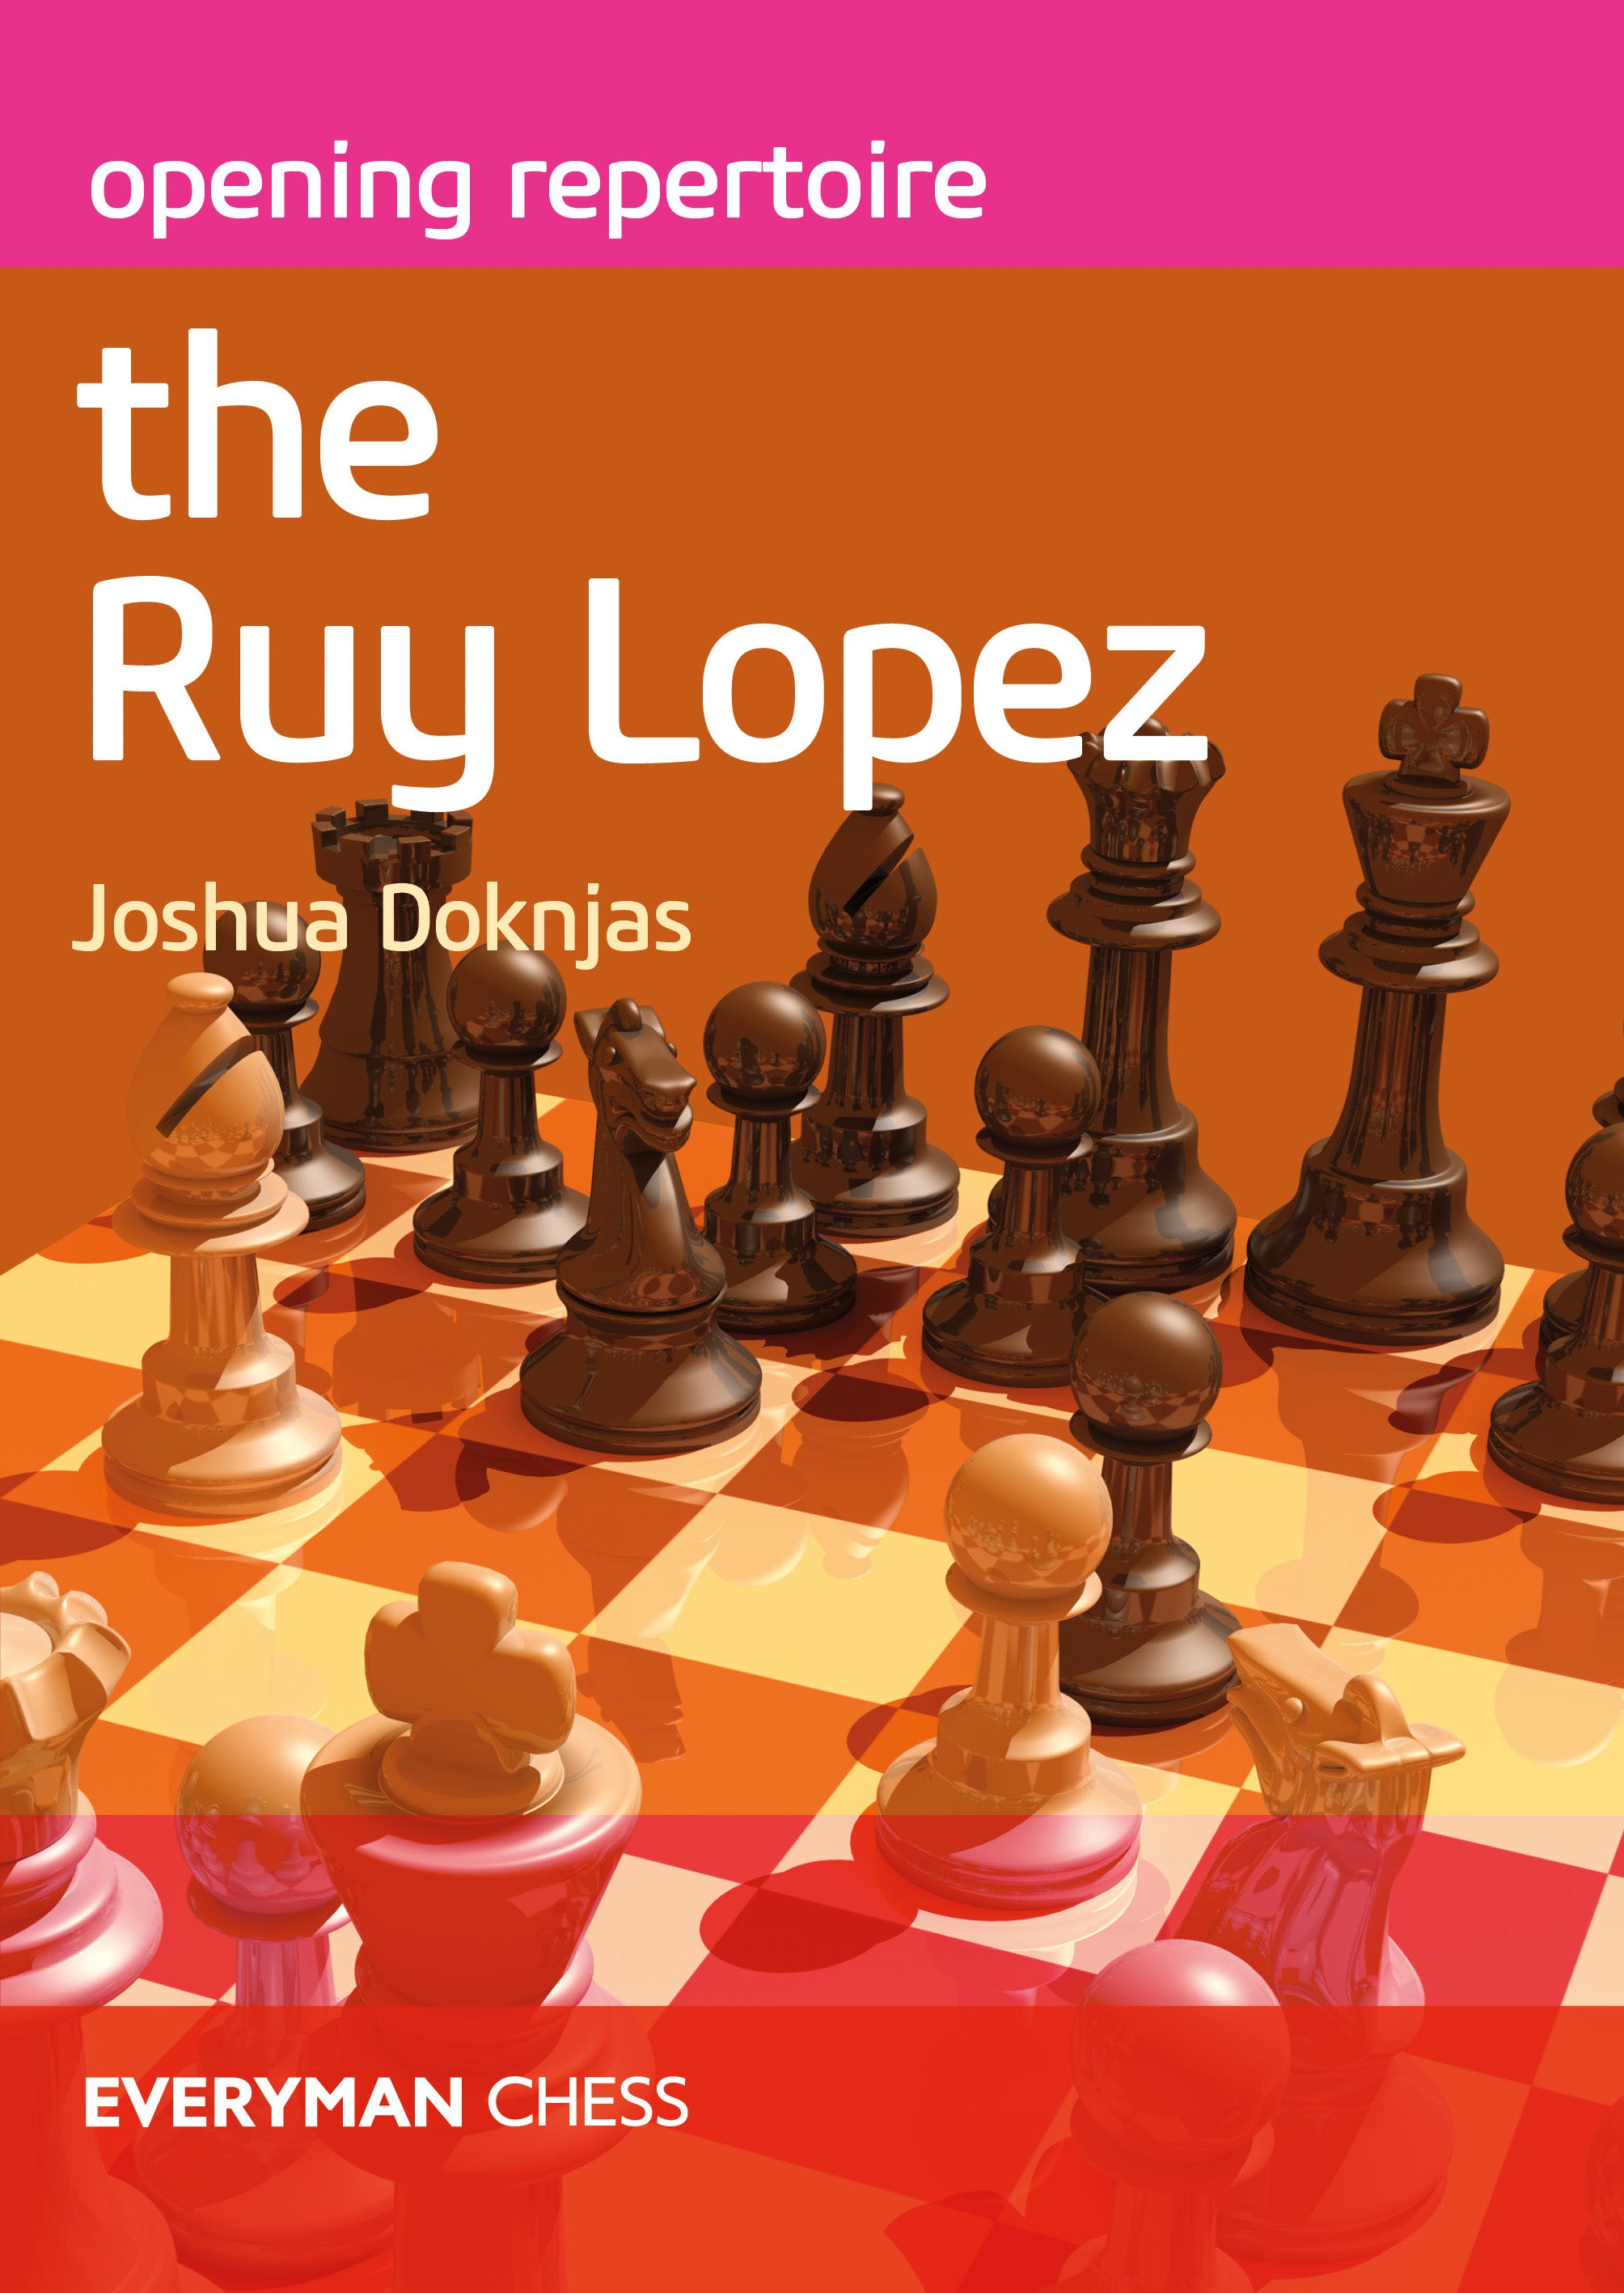 Roman's Chess Download 84: Rybka's Quest for replacing RUY LOPEZ